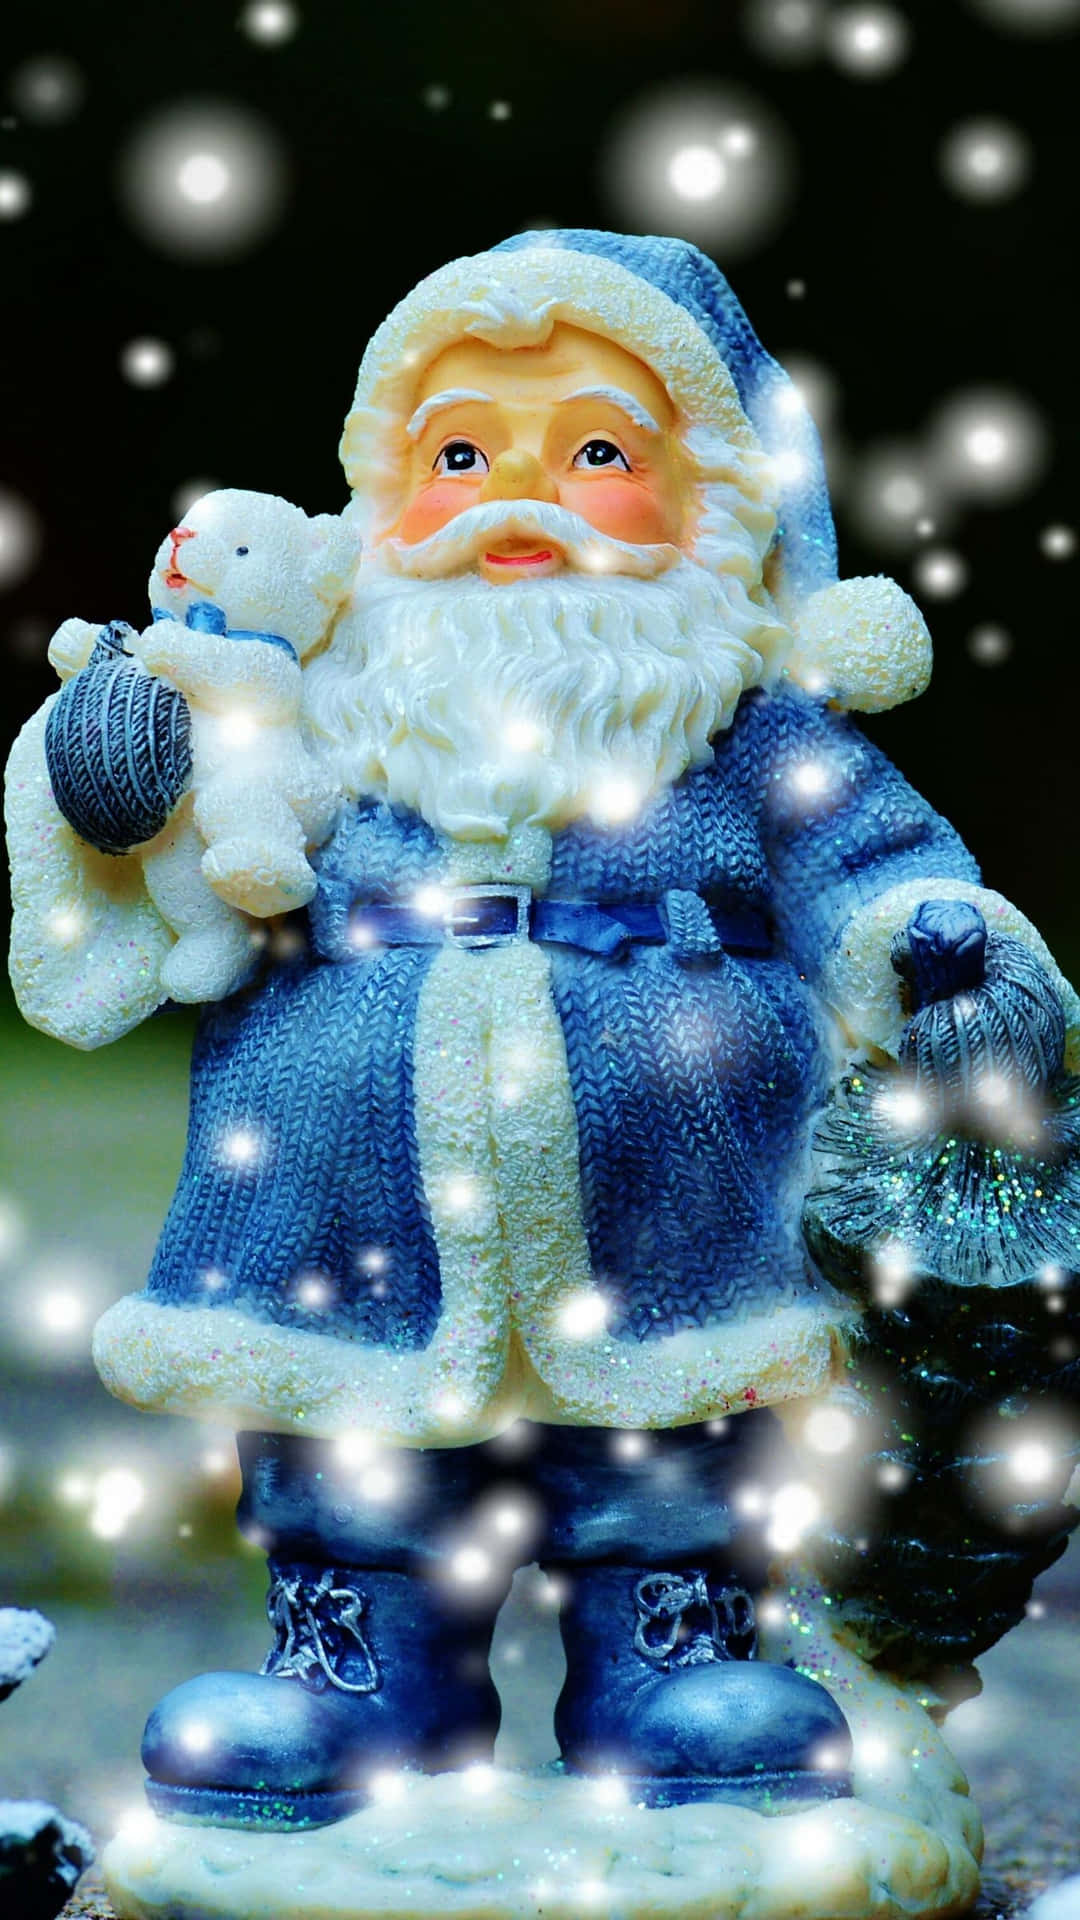 Celebrate Christmas 2020 with Santa Claus Wallpaper